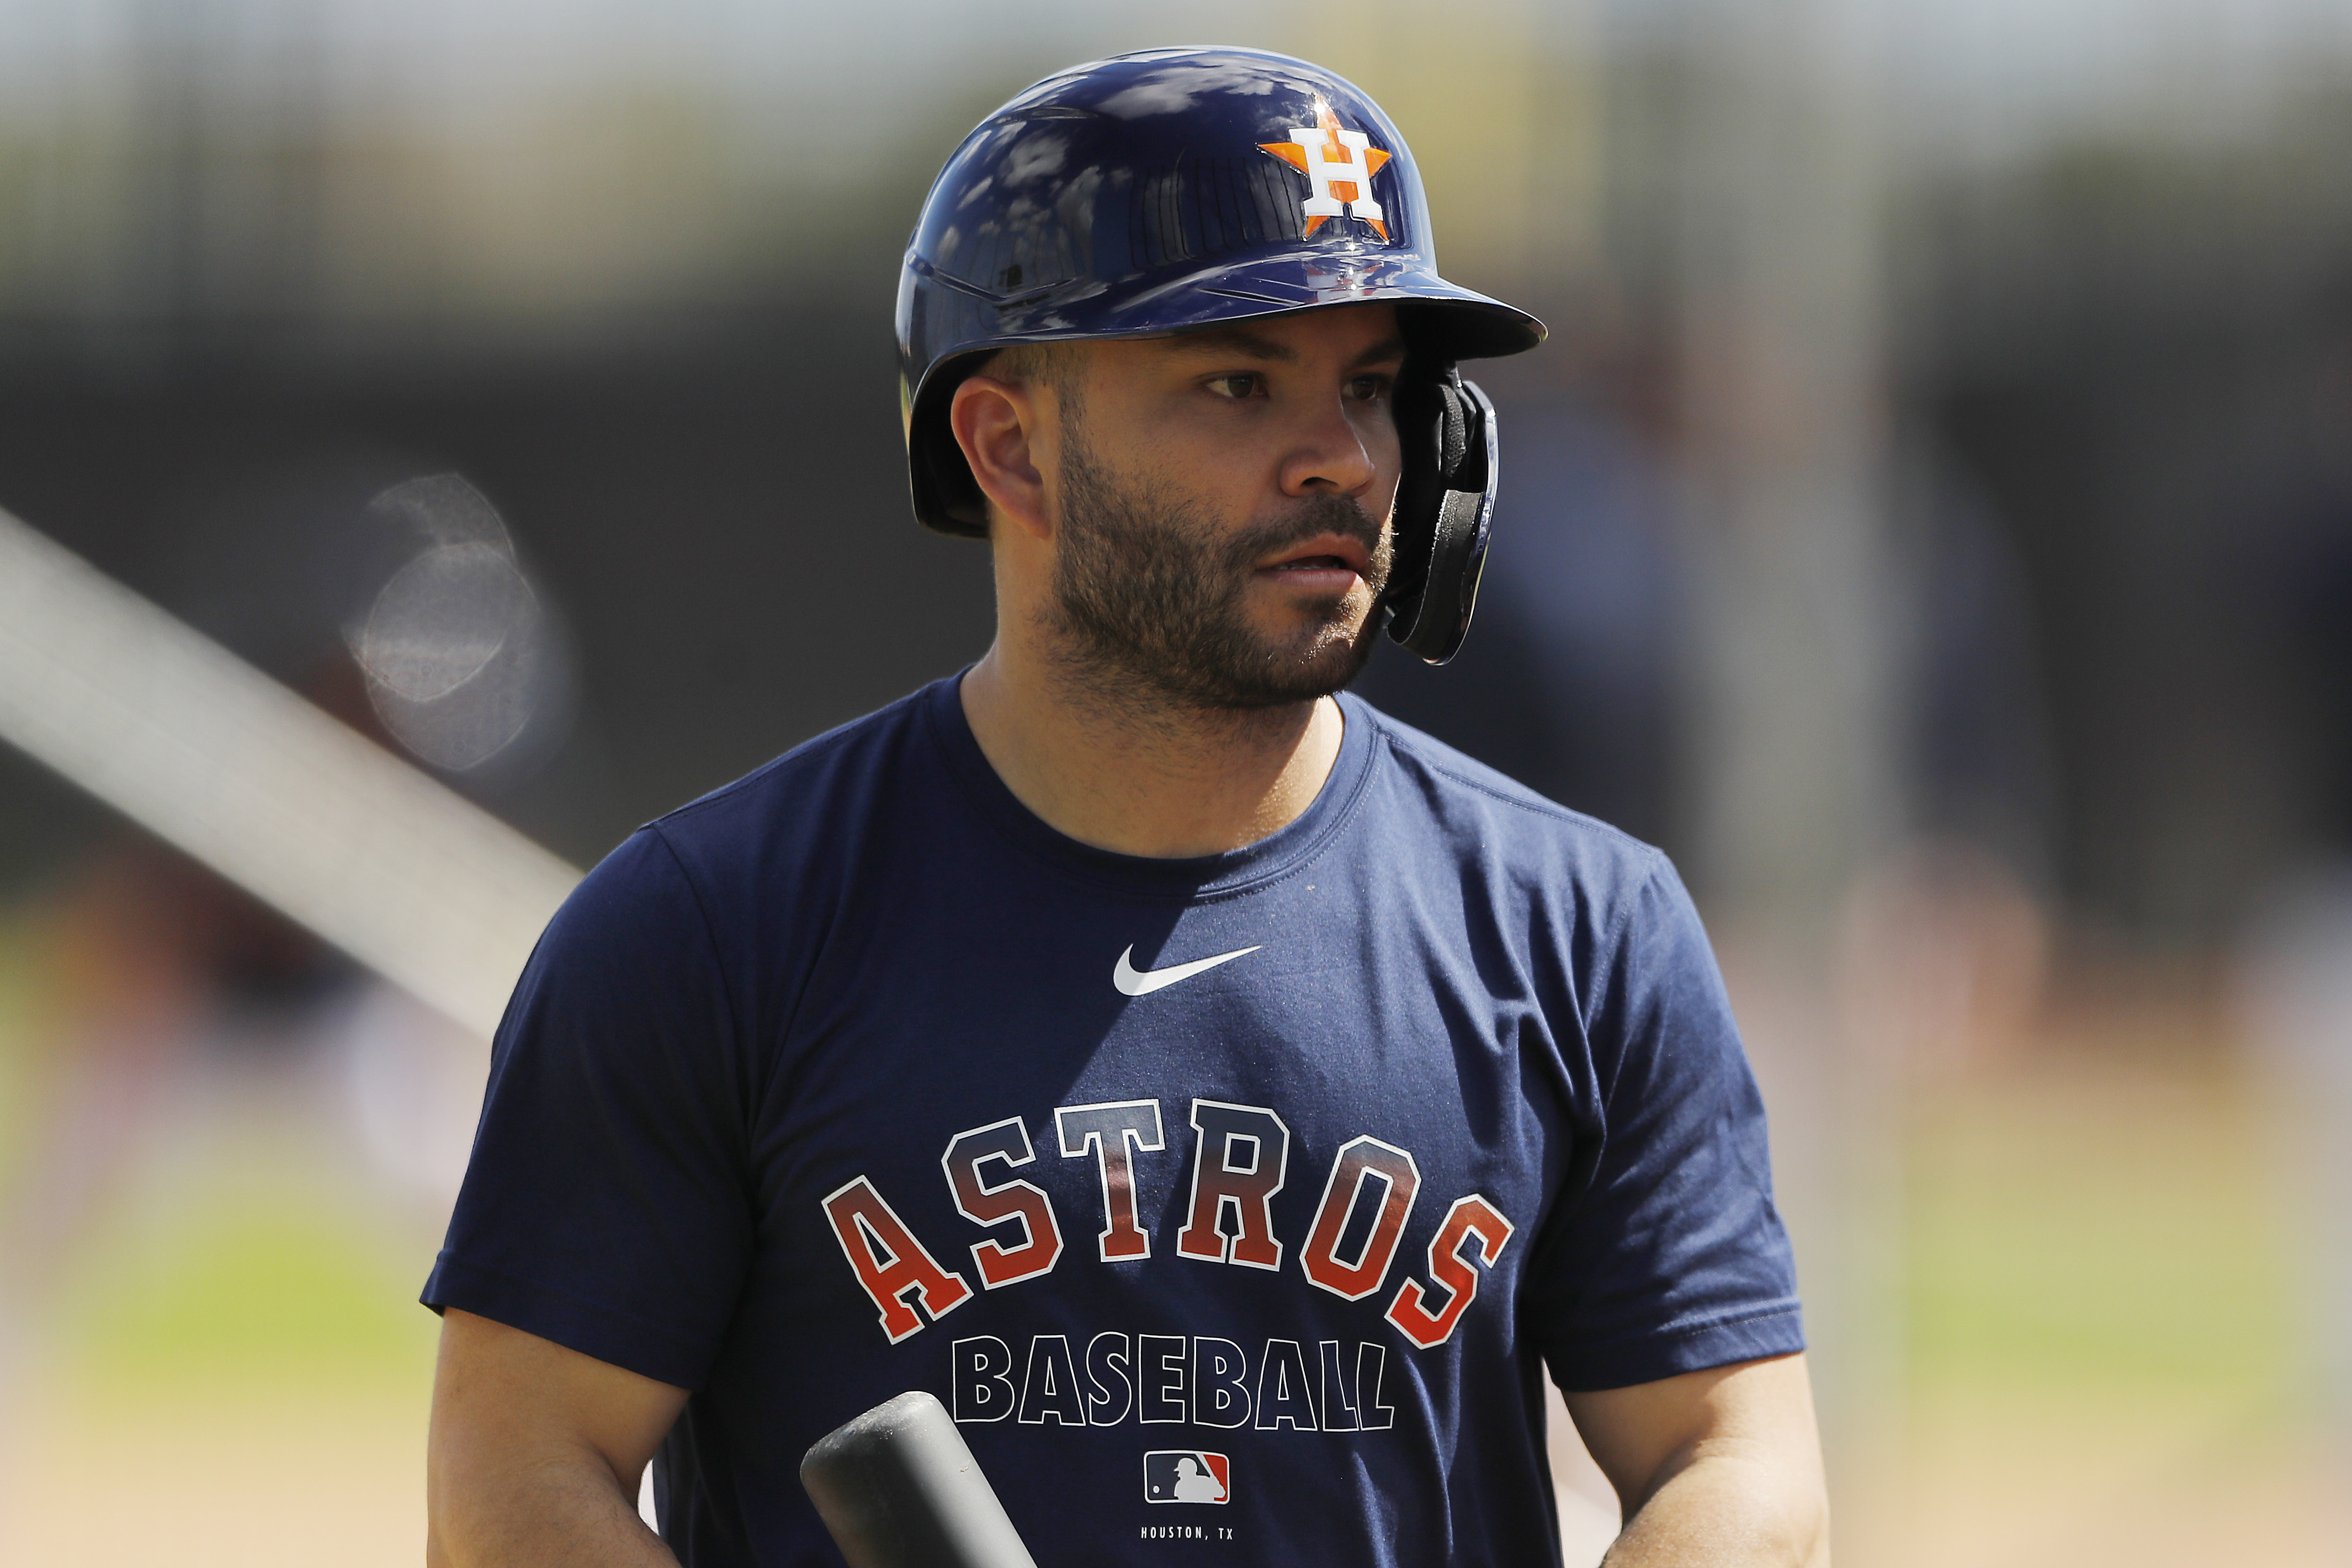 José Altuve, Astros ride emotional high following dust-up with